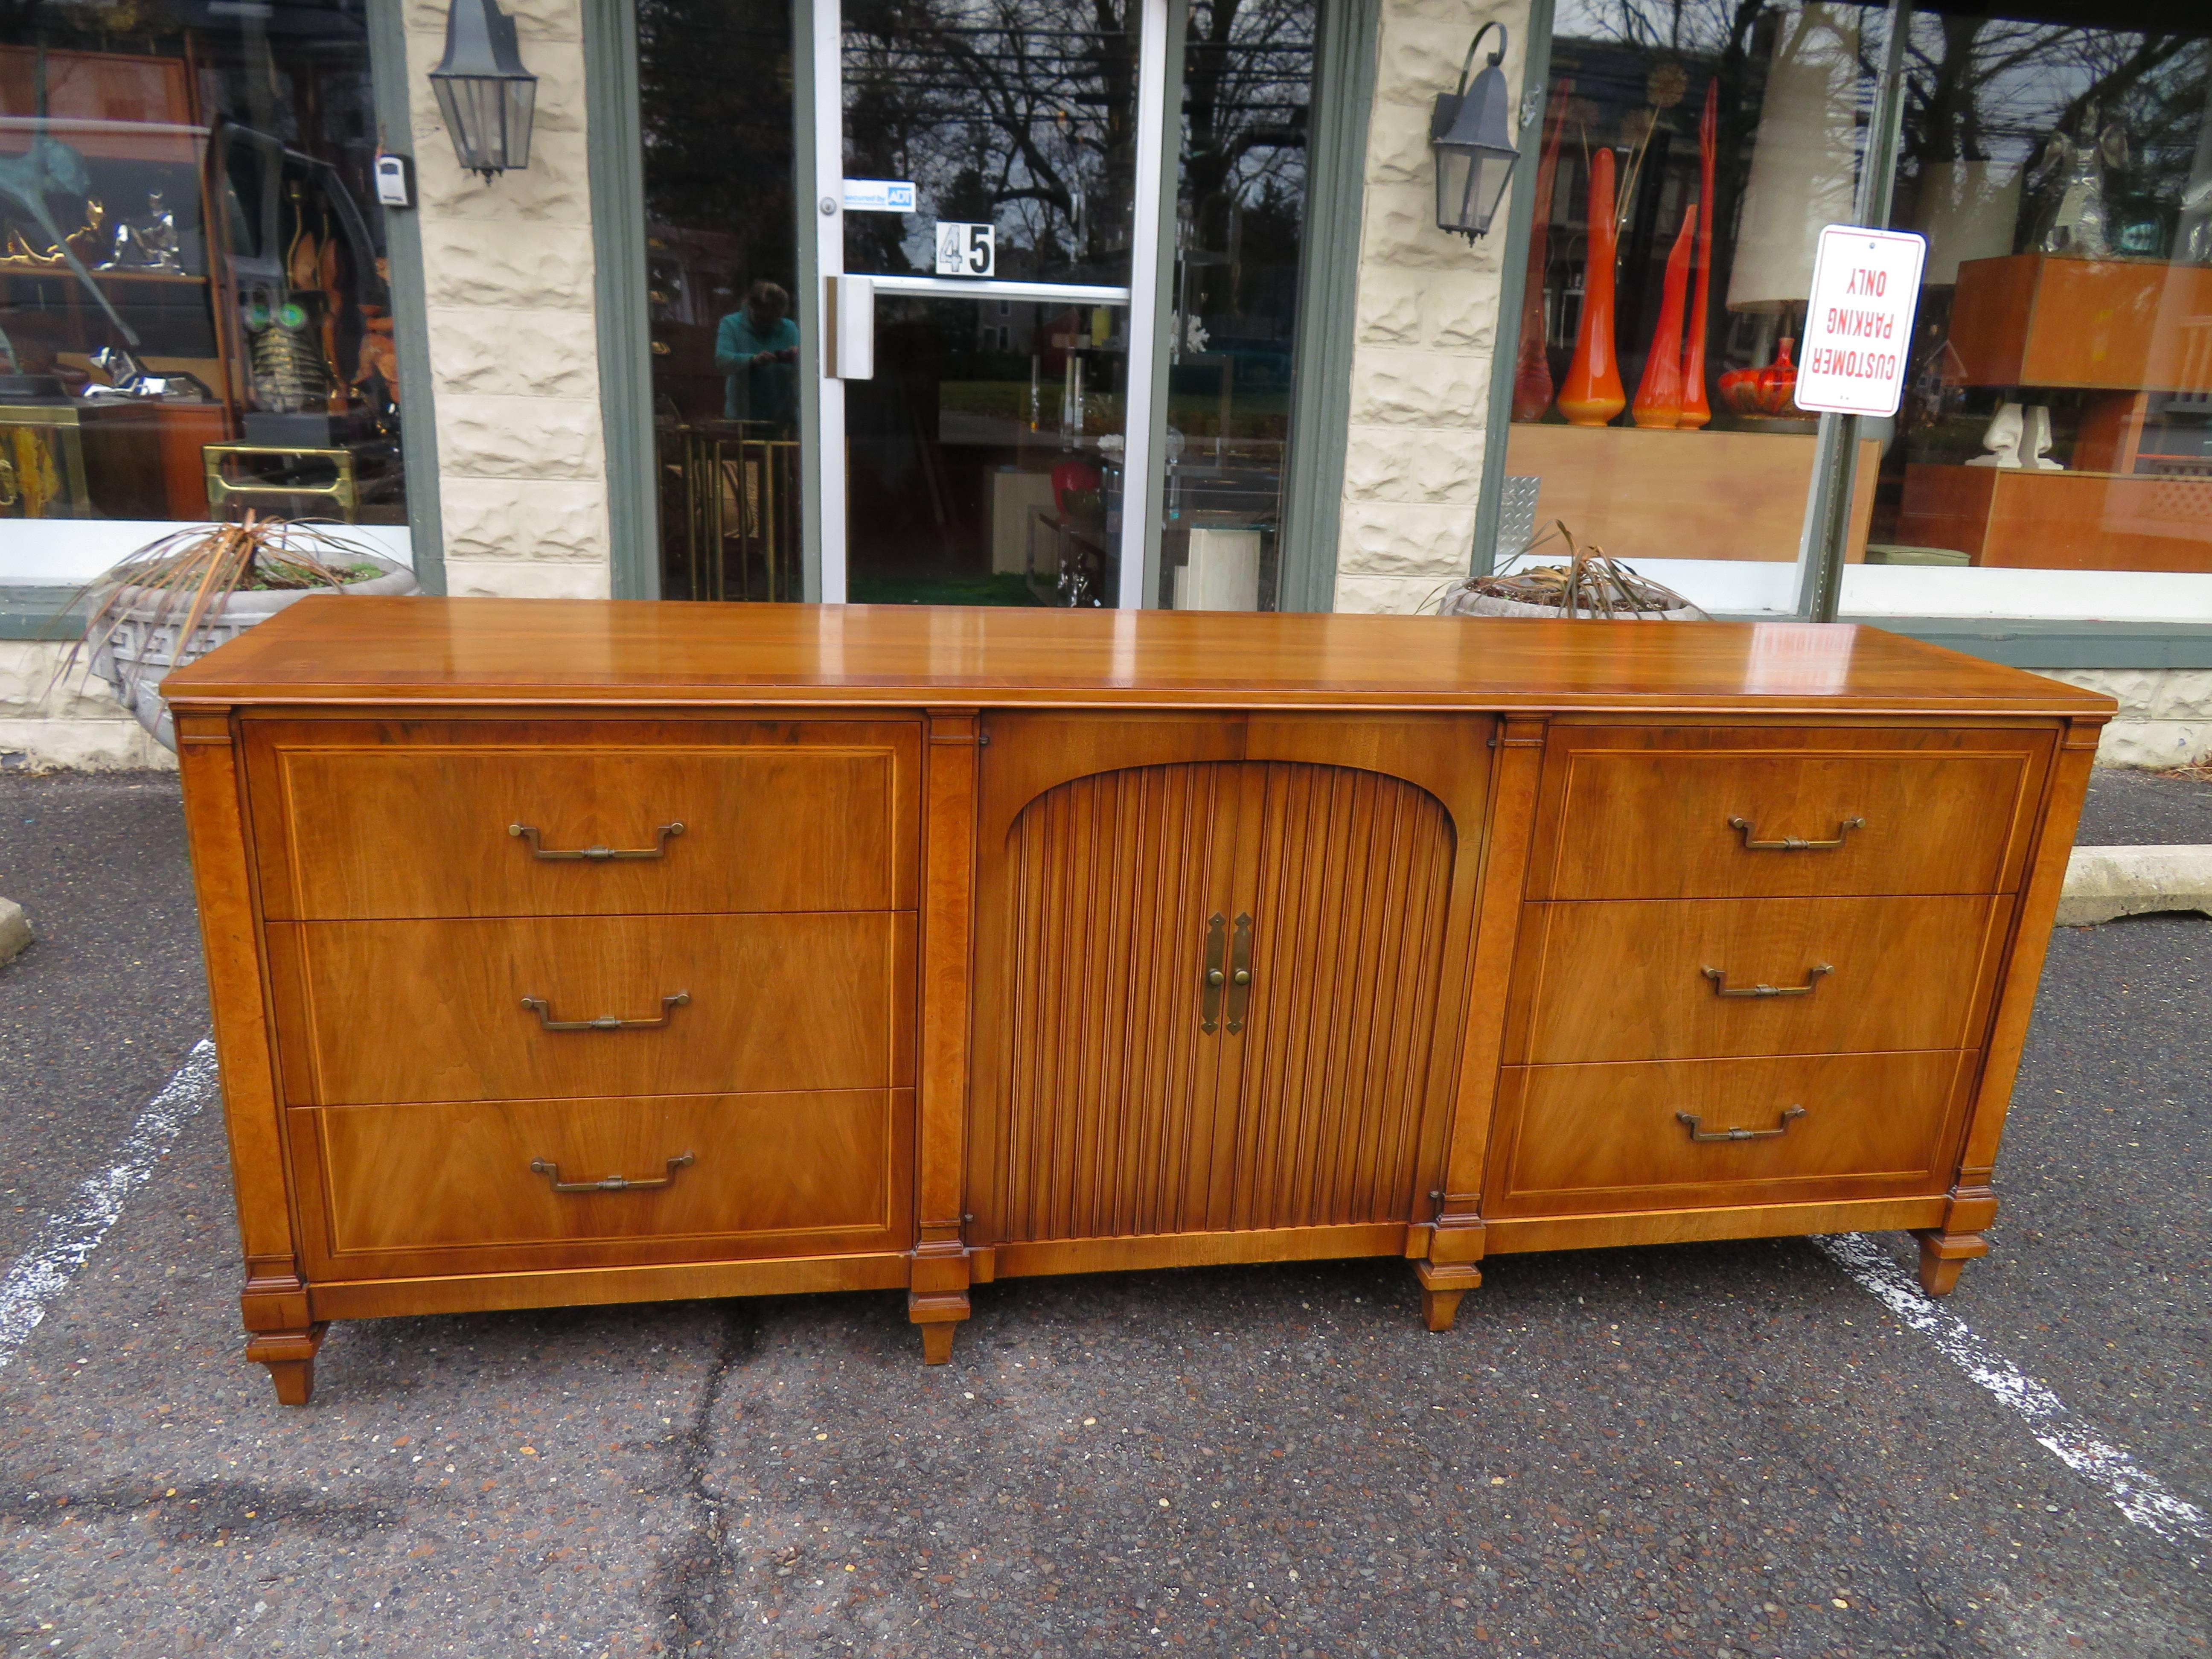 Fabulous neoclassical designed walnut credenza by Widdicomb. Just take a look at all the wonderful details and craftsmanship of this magnificent piece. They surely don't make furniture like this anymore that's for sure.